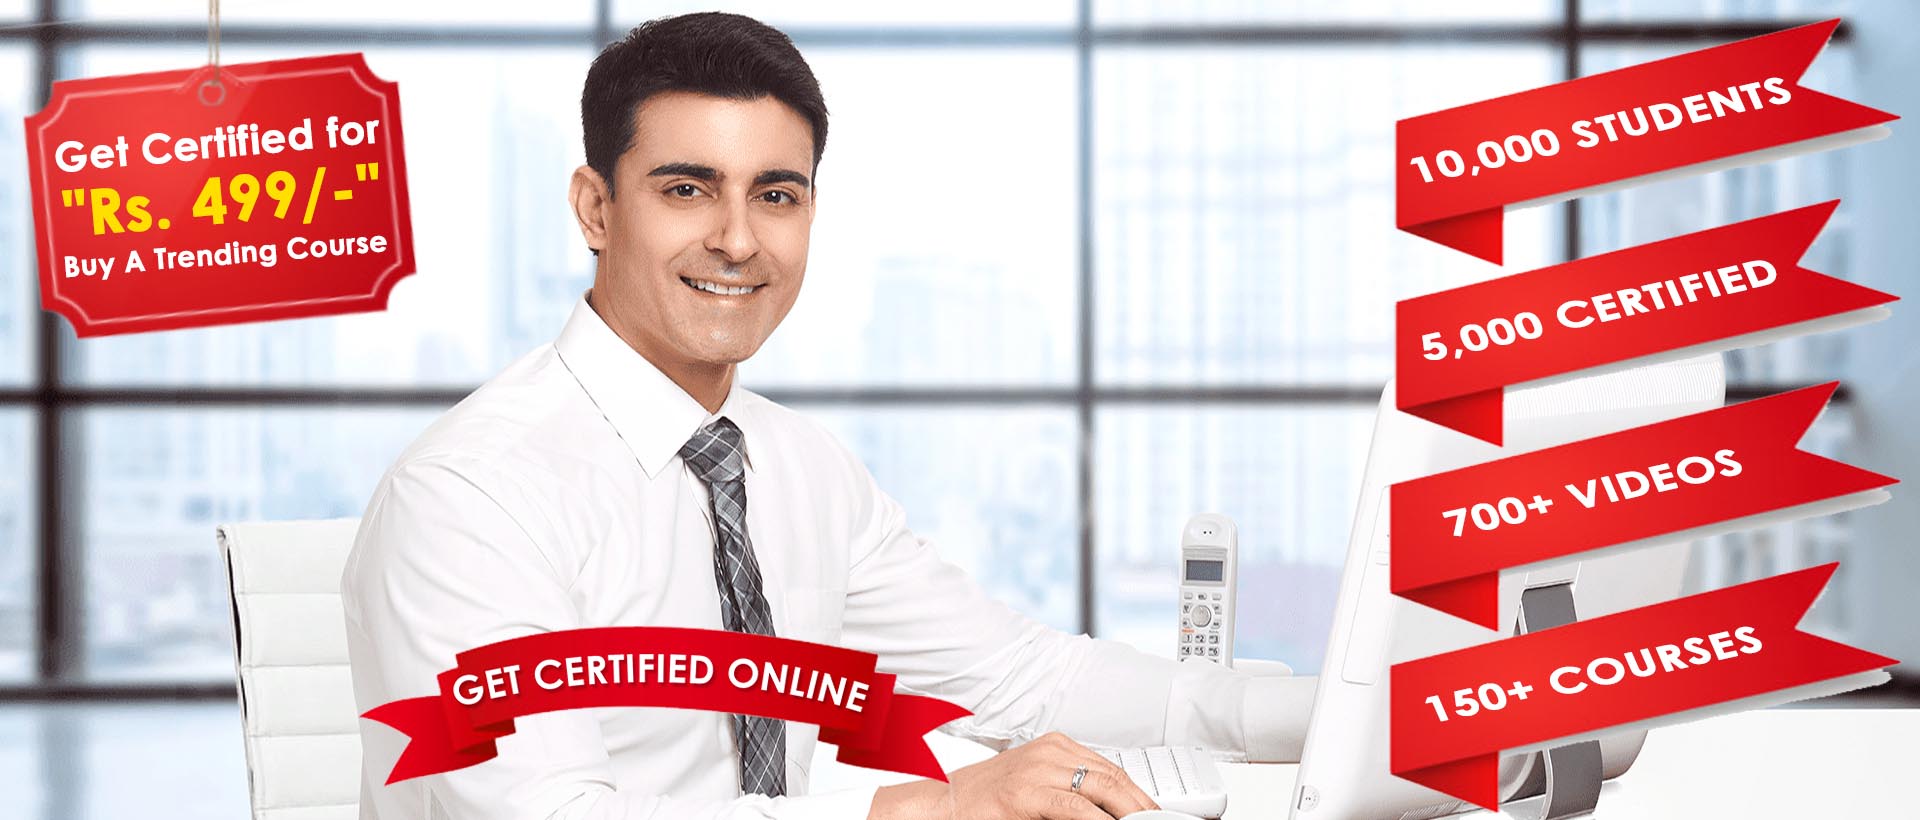 Government Recognised Approved Online Certificate Courses in India for Free Best Popular Trending Short Term Job Oriented Certification | GYAAN.COM | Gautam Rode